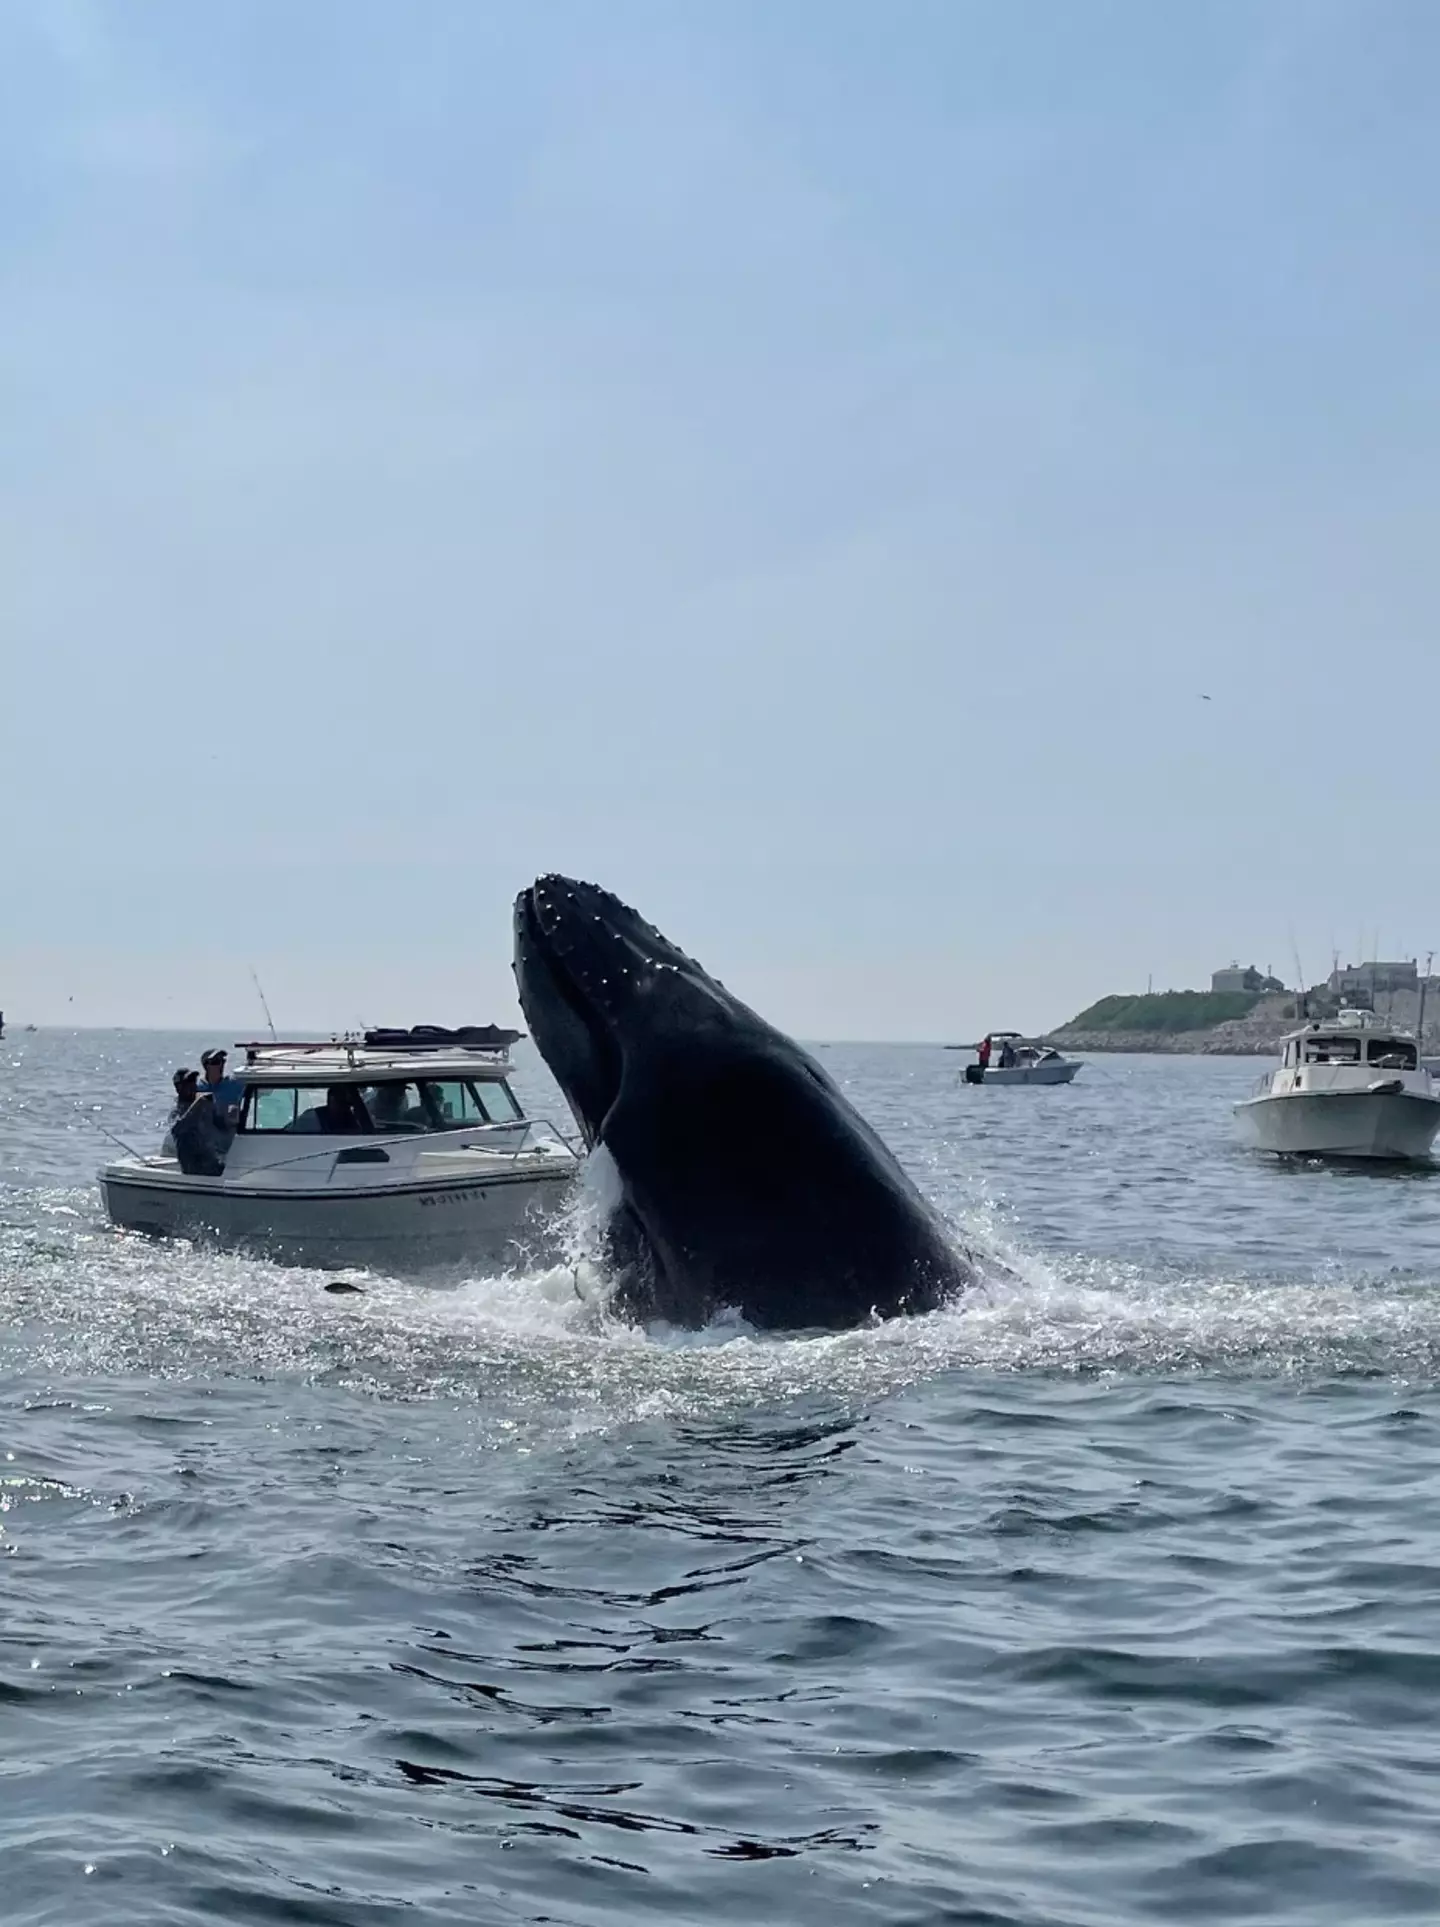 The whale breached the boat at 10am local time.